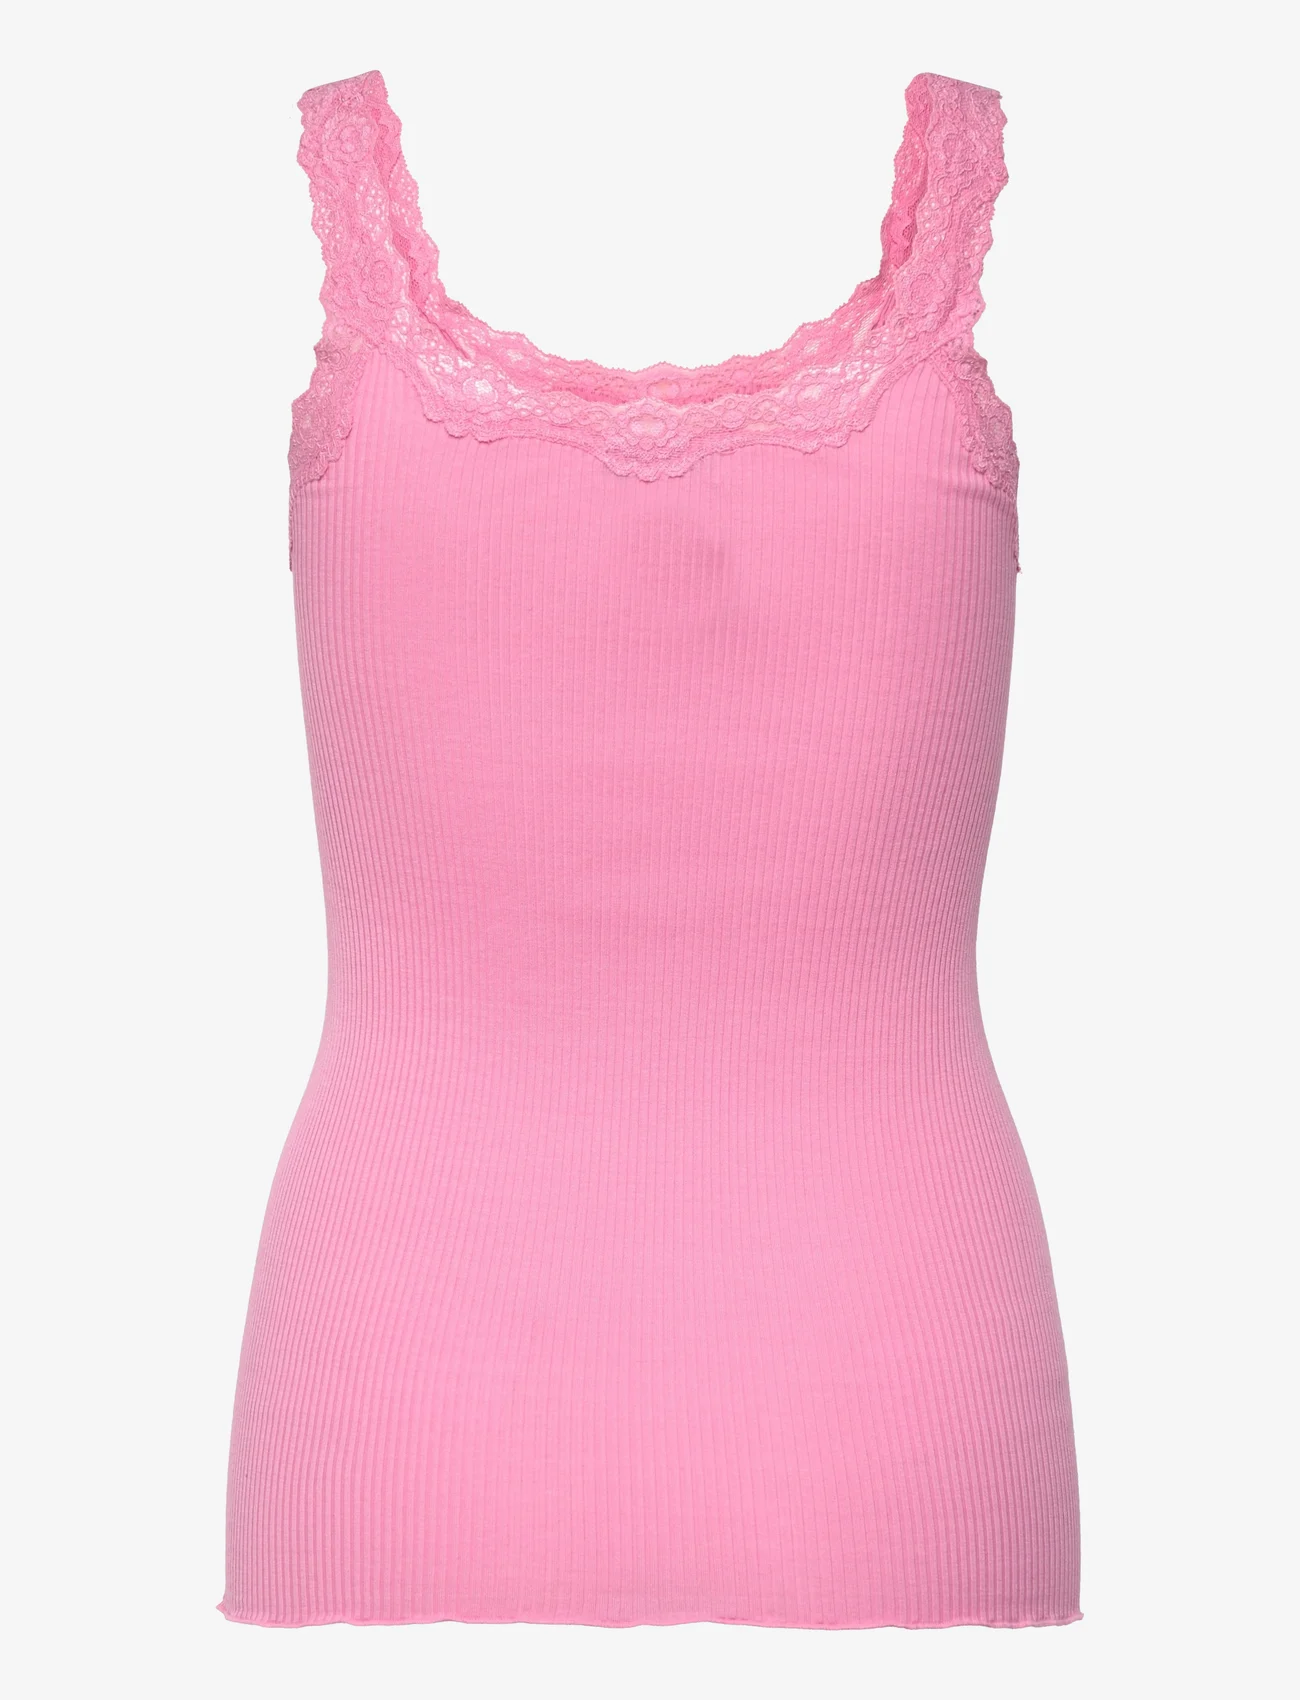 Rosemunde - Silk top w/ lace - sleeveless tops - dolly pink - 1